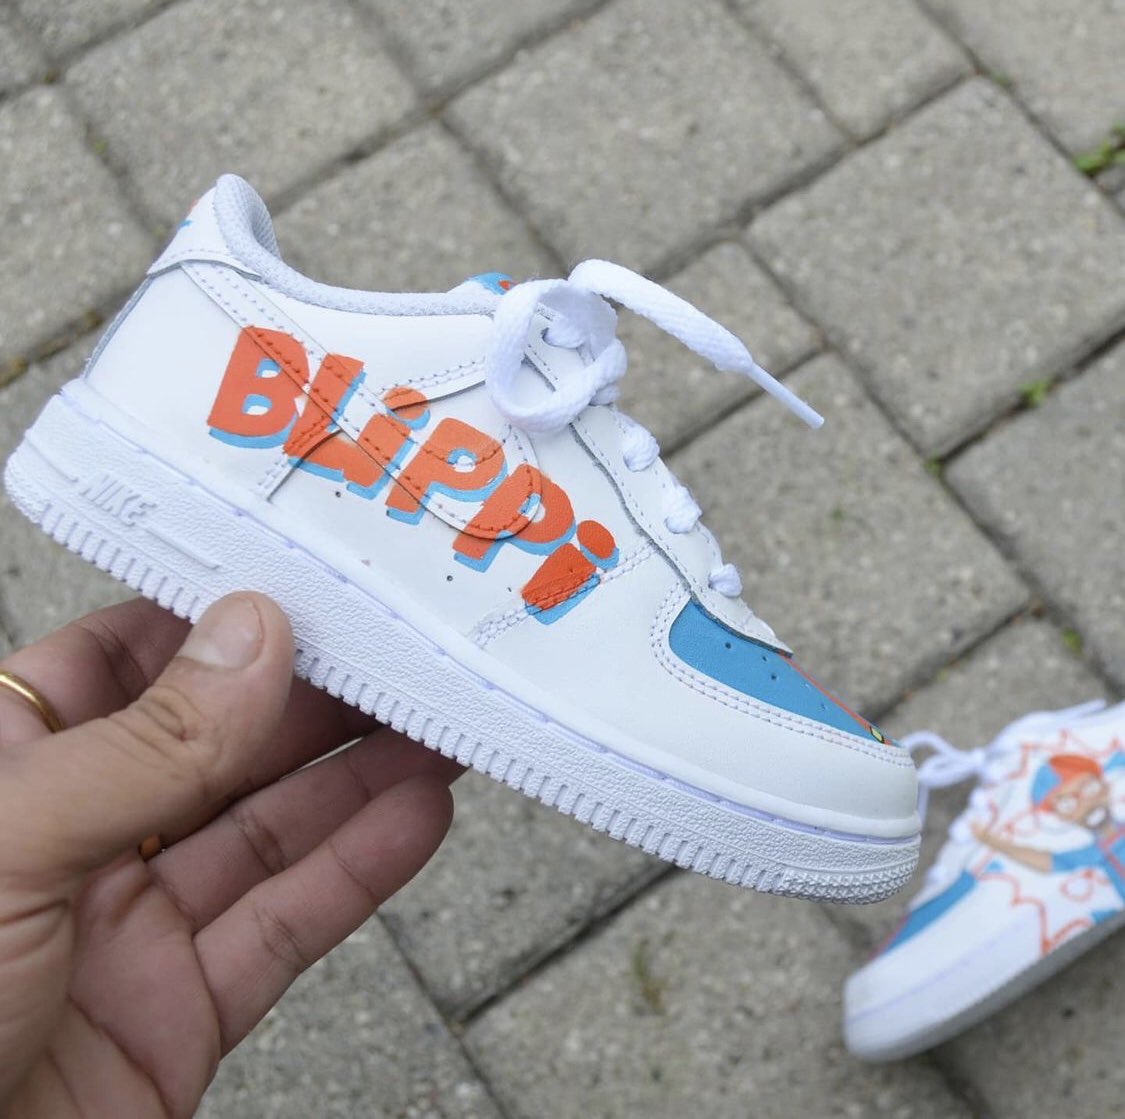 House Of SNKRZ on Twitter: "#tb had the pleasure of these custom ' Blippi' AF1s for my nieces birthday! This pair was a blast and I love how colors compliment one